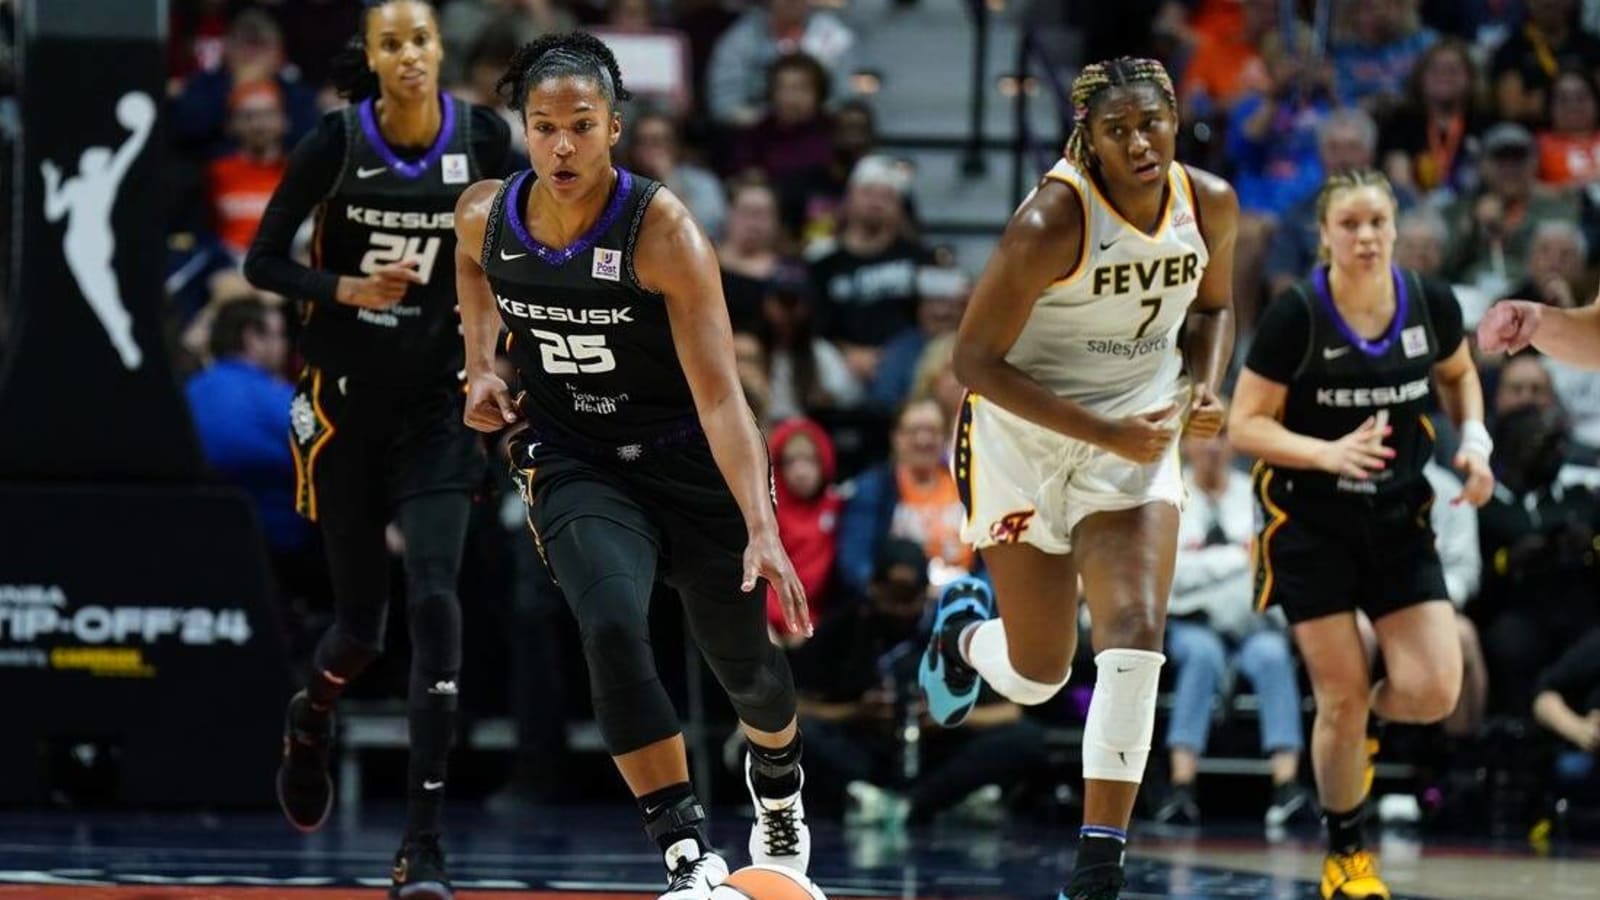 Fever competitive but lose to Sun to remain winless